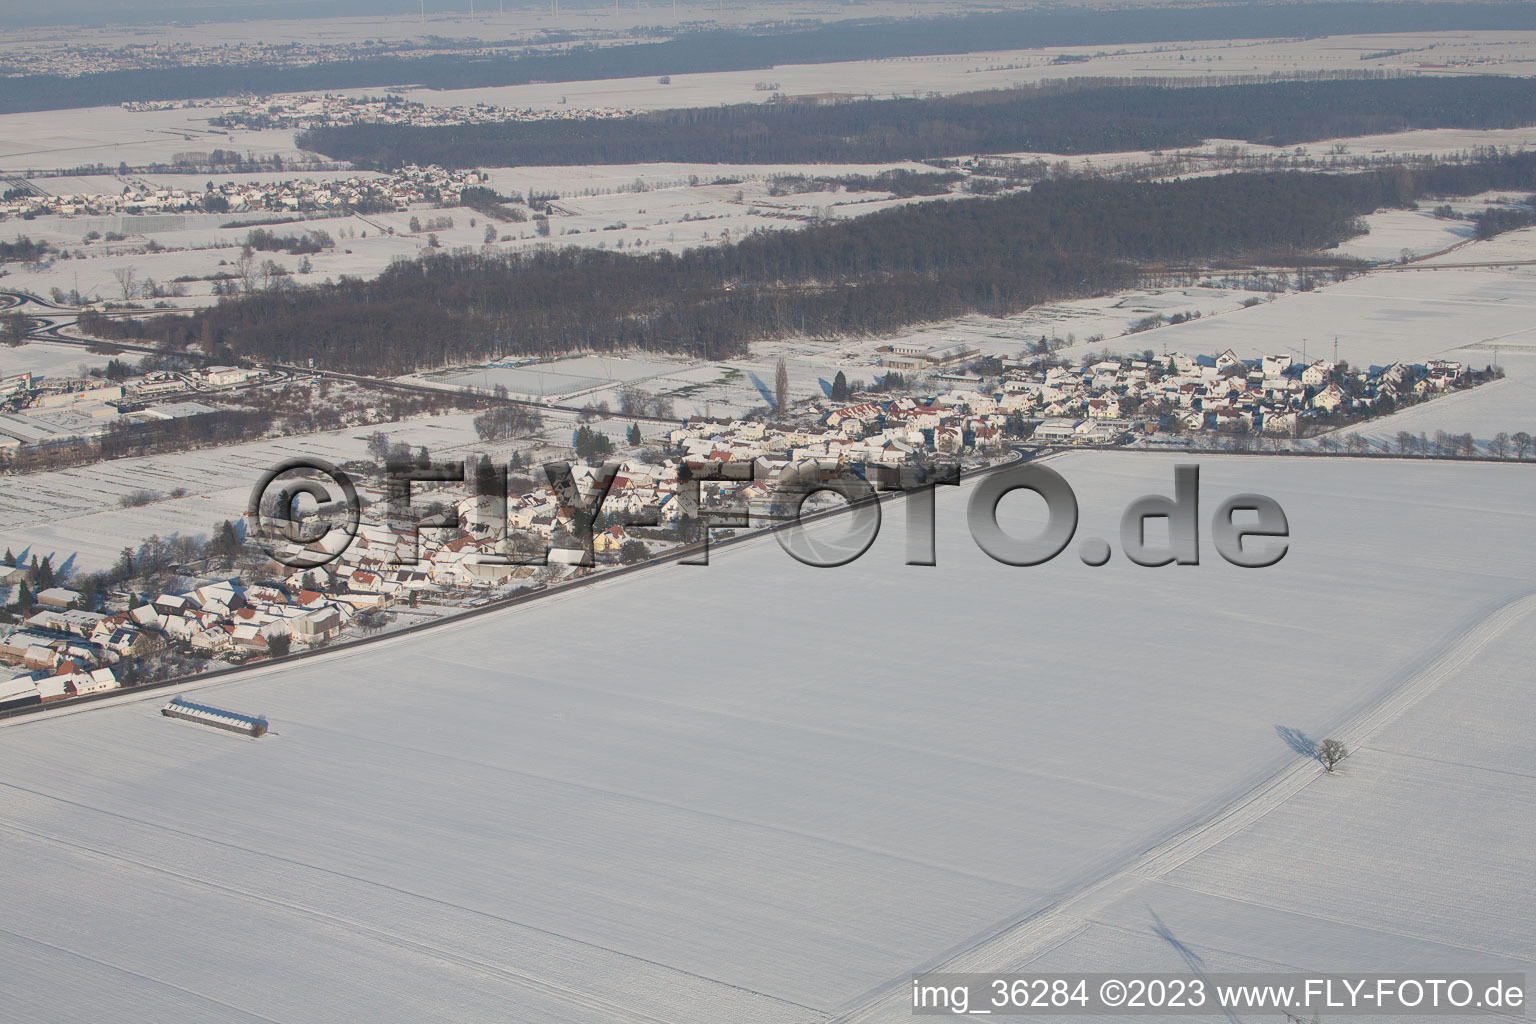 Aerial view of District Minderslachen in Kandel in the state Rhineland-Palatinate, Germany